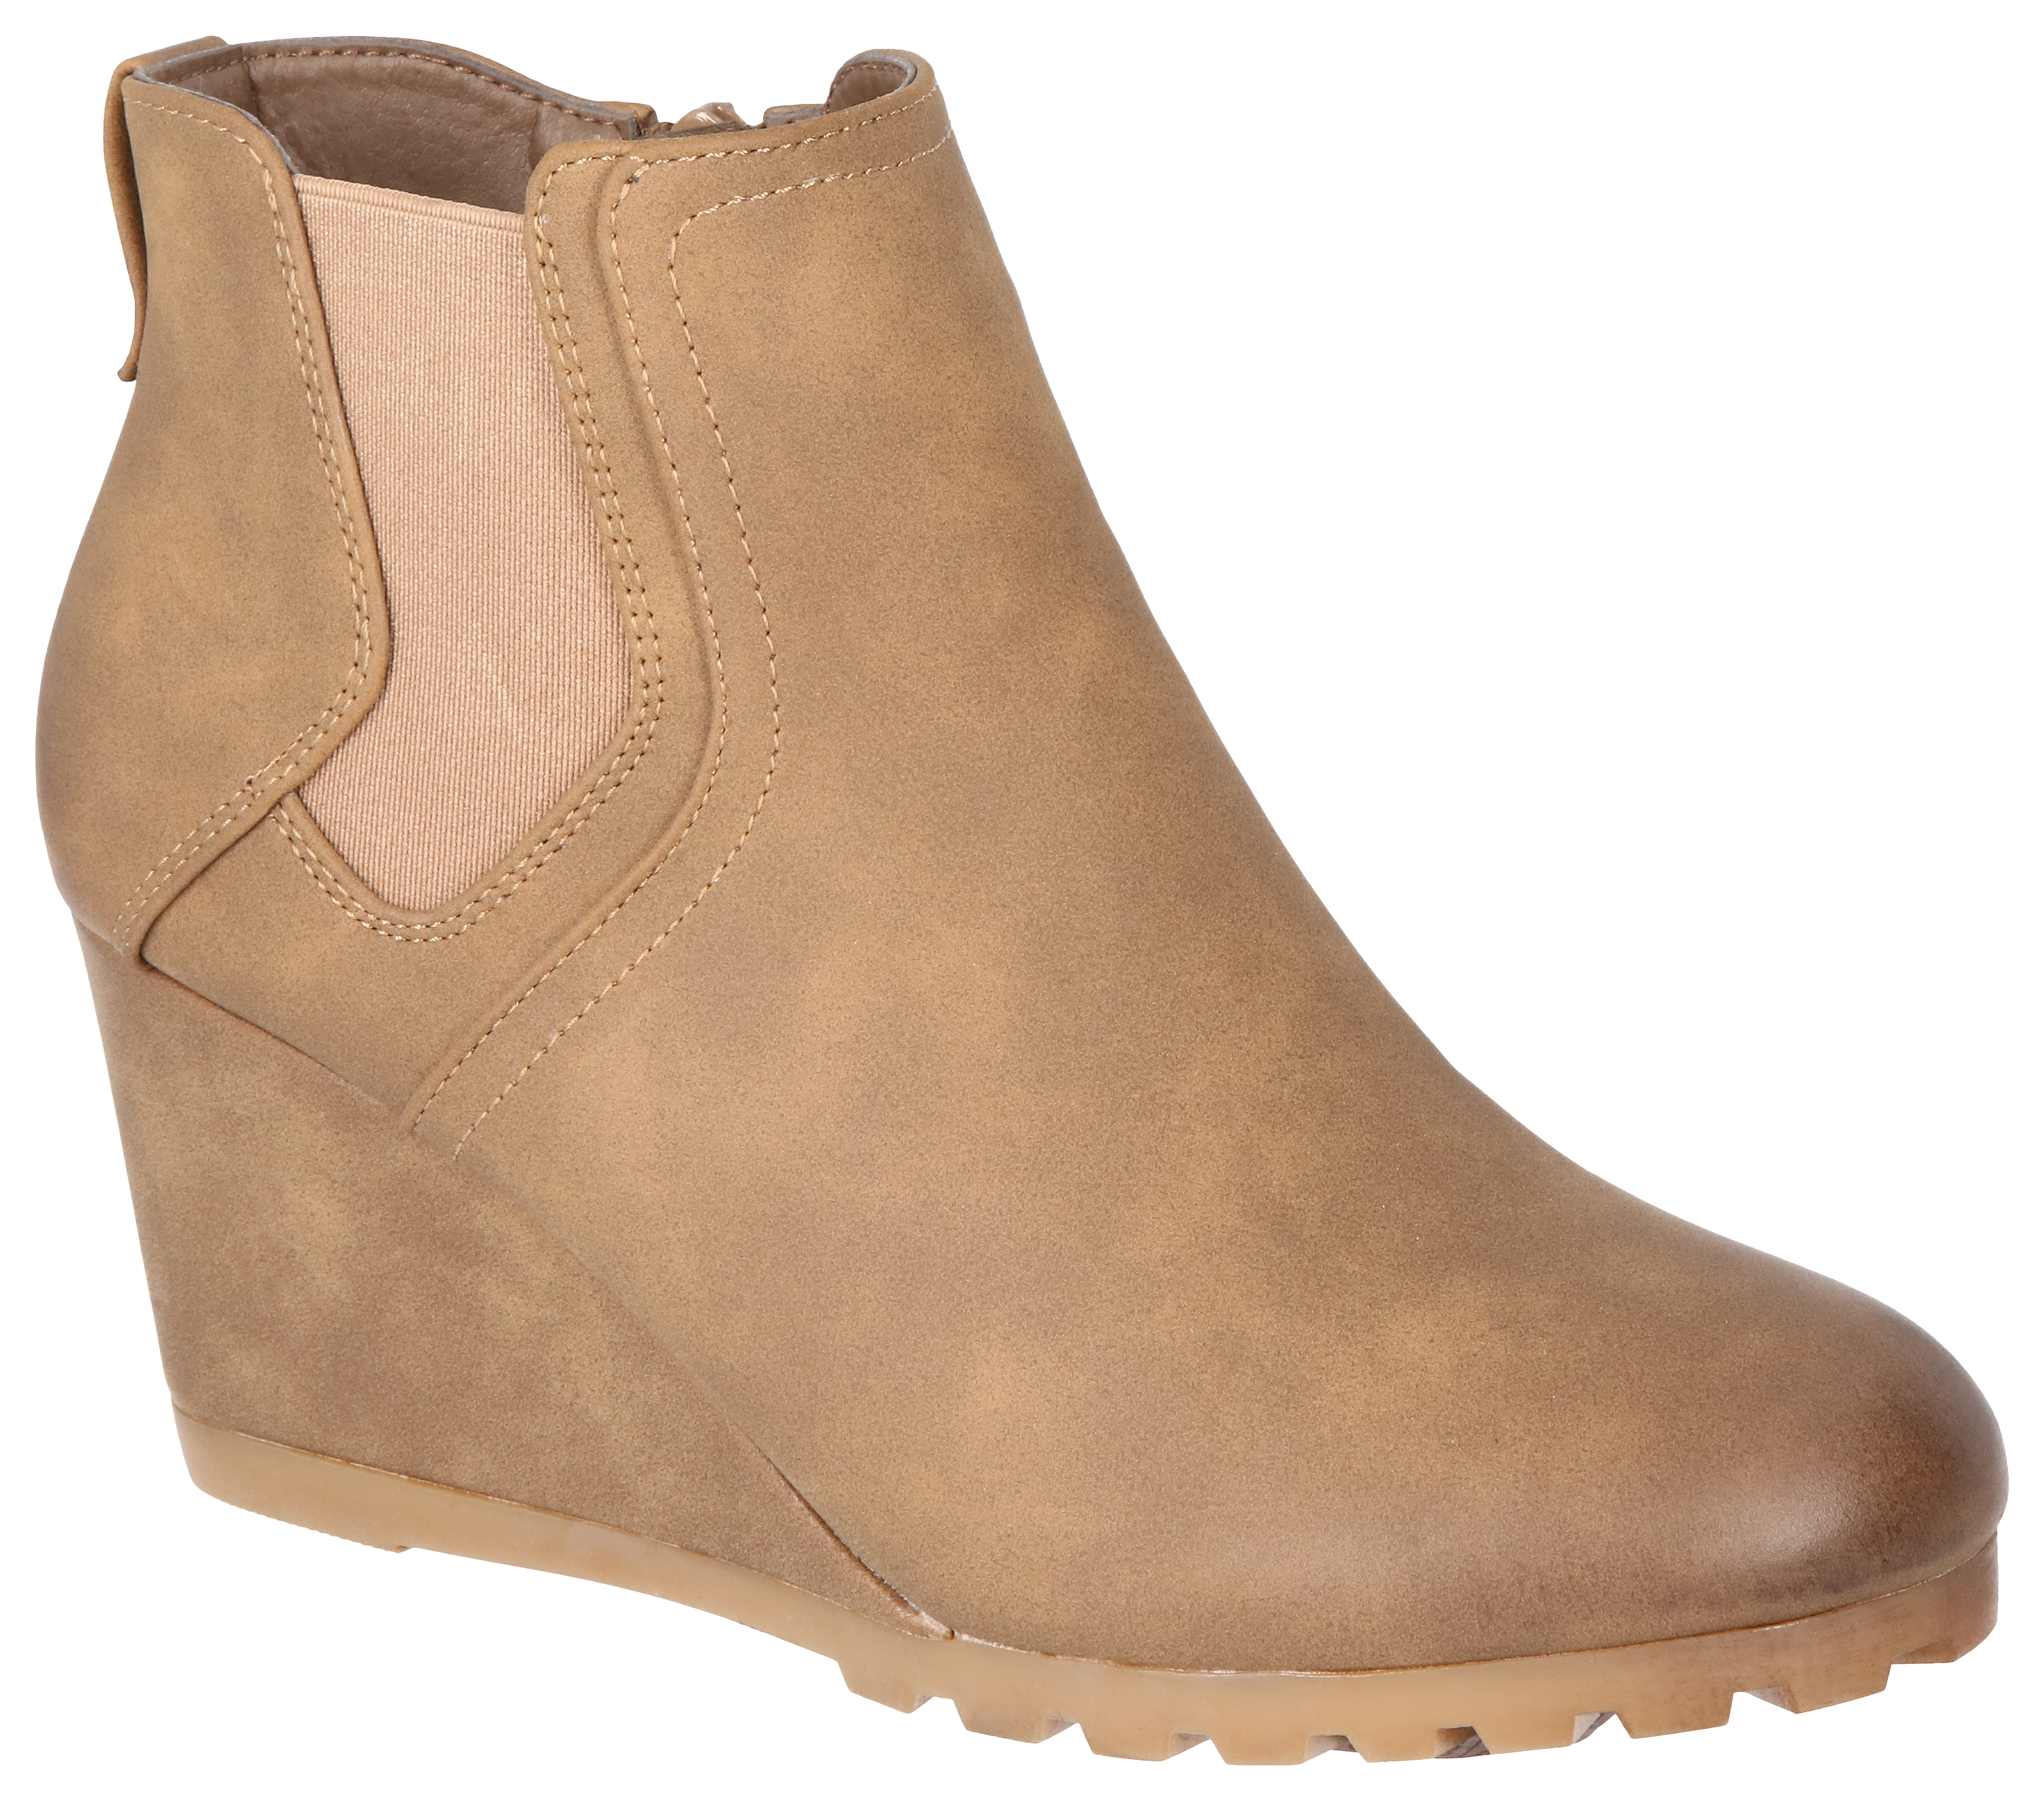 Natural Reflections Trista Rugged Boots for Ladies - Taupe - 8M